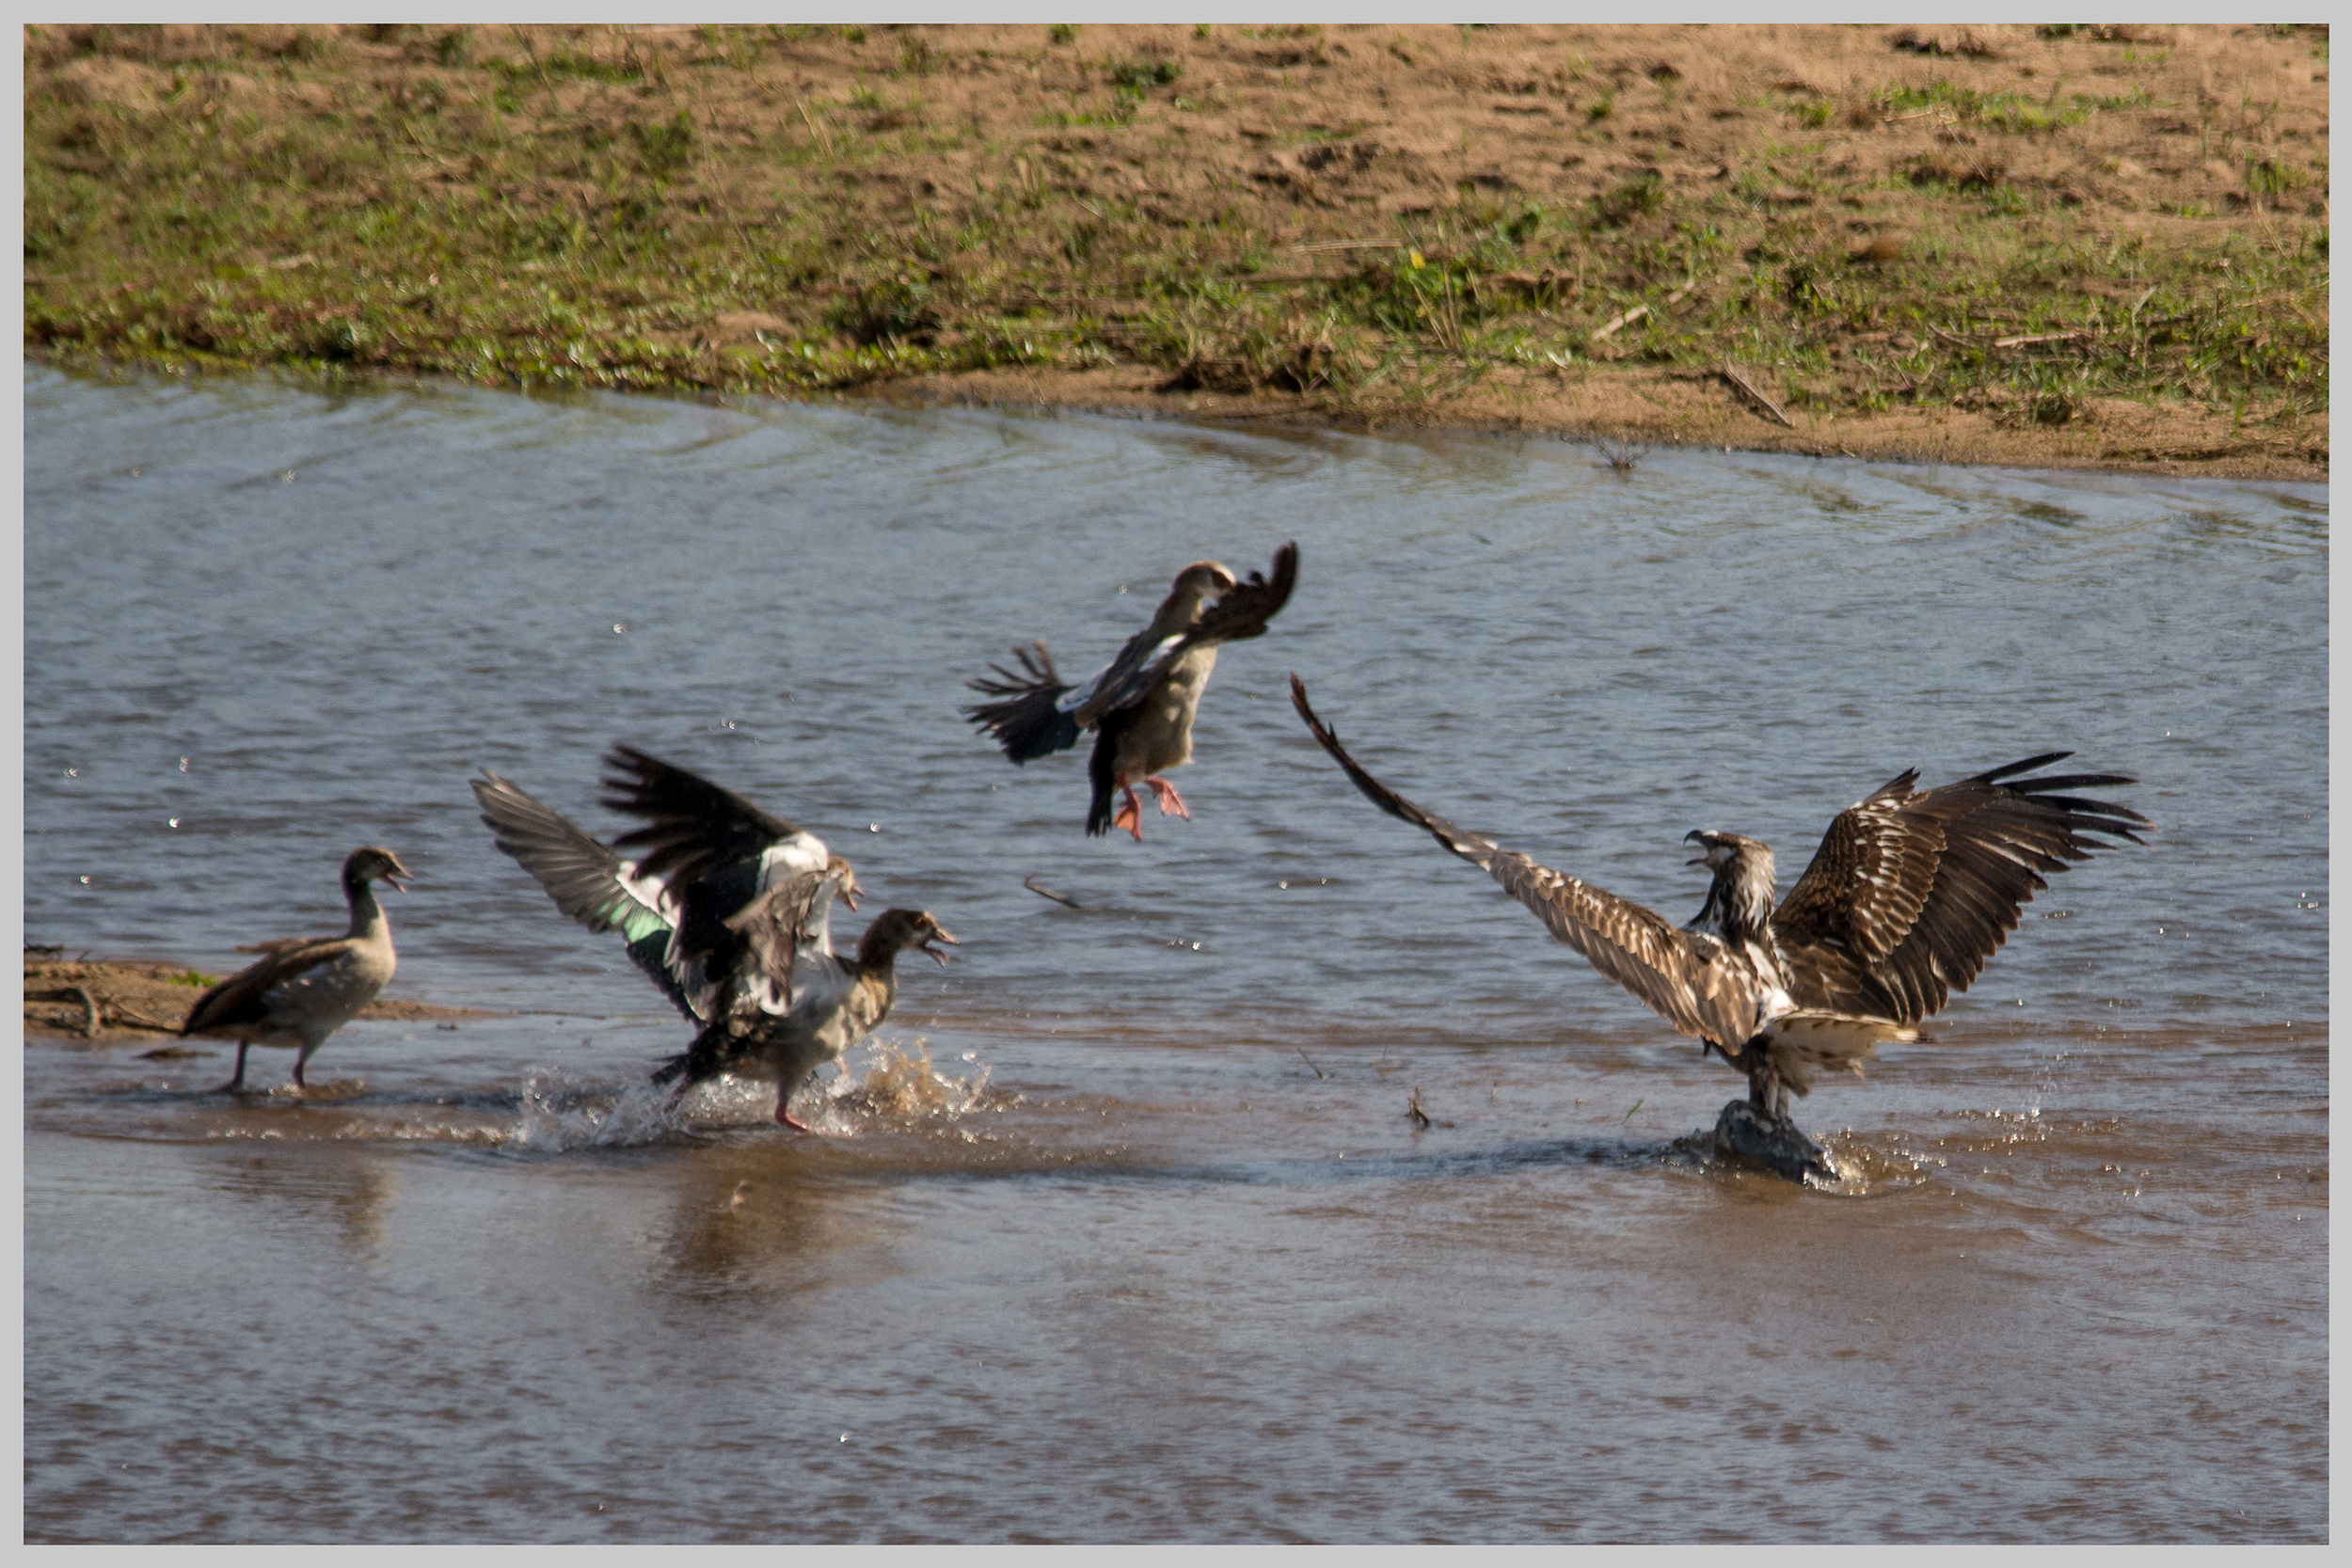 Juvenile African Fish Eagle protecting it's catch from Egyptian Geese